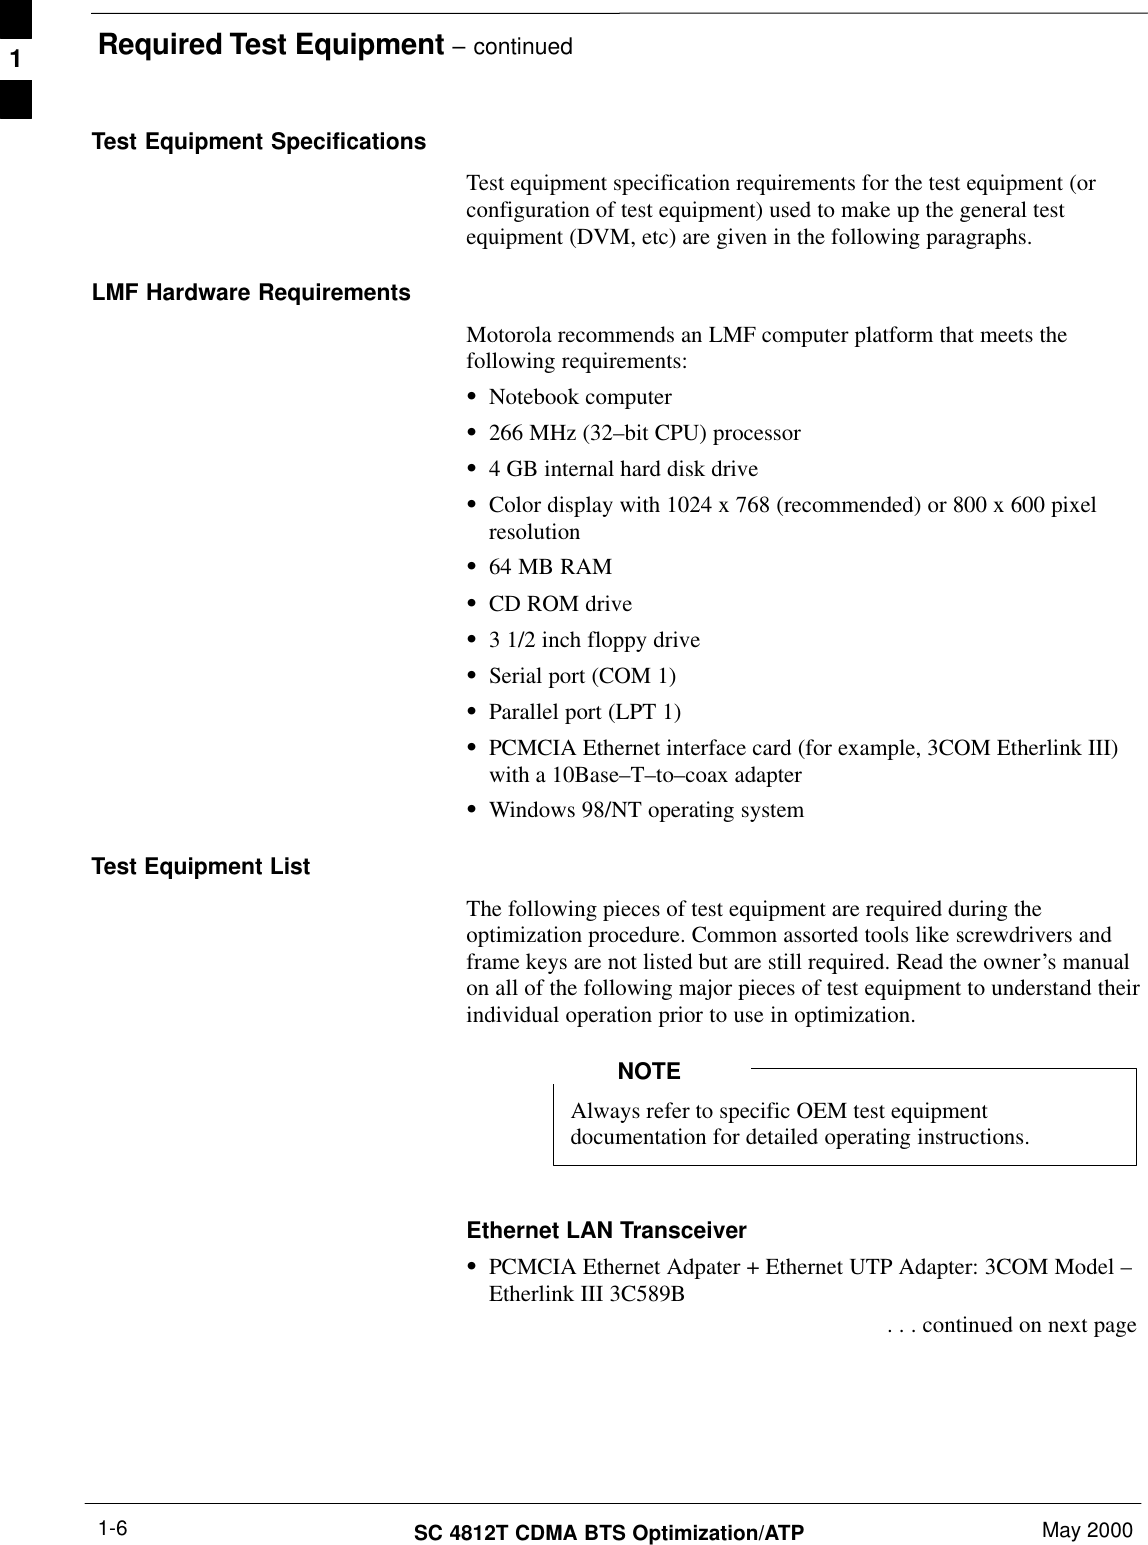 Required Test Equipment – continuedSC 4812T CDMA BTS Optimization/ATP May 20001-6Test Equipment SpecificationsTest equipment specification requirements for the test equipment (orconfiguration of test equipment) used to make up the general testequipment (DVM, etc) are given in the following paragraphs.LMF Hardware RequirementsMotorola recommends an LMF computer platform that meets thefollowing requirements:SNotebook computerS266 MHz (32–bit CPU) processorS4 GB internal hard disk driveSColor display with 1024 x 768 (recommended) or 800 x 600 pixelresolutionS64 MB RAMSCD ROM driveS3 1/2 inch floppy driveSSerial port (COM 1)SParallel port (LPT 1)SPCMCIA Ethernet interface card (for example, 3COM Etherlink III)with a 10Base–T–to–coax adapterSWindows 98/NT operating systemTest Equipment ListThe following pieces of test equipment are required during theoptimization procedure. Common assorted tools like screwdrivers andframe keys are not listed but are still required. Read the owner’s manualon all of the following major pieces of test equipment to understand theirindividual operation prior to use in optimization.Always refer to specific OEM test equipmentdocumentation for detailed operating instructions.NOTEEthernet LAN TransceiverSPCMCIA Ethernet Adpater + Ethernet UTP Adapter: 3COM Model –Etherlink III 3C589B . . . continued on next page1